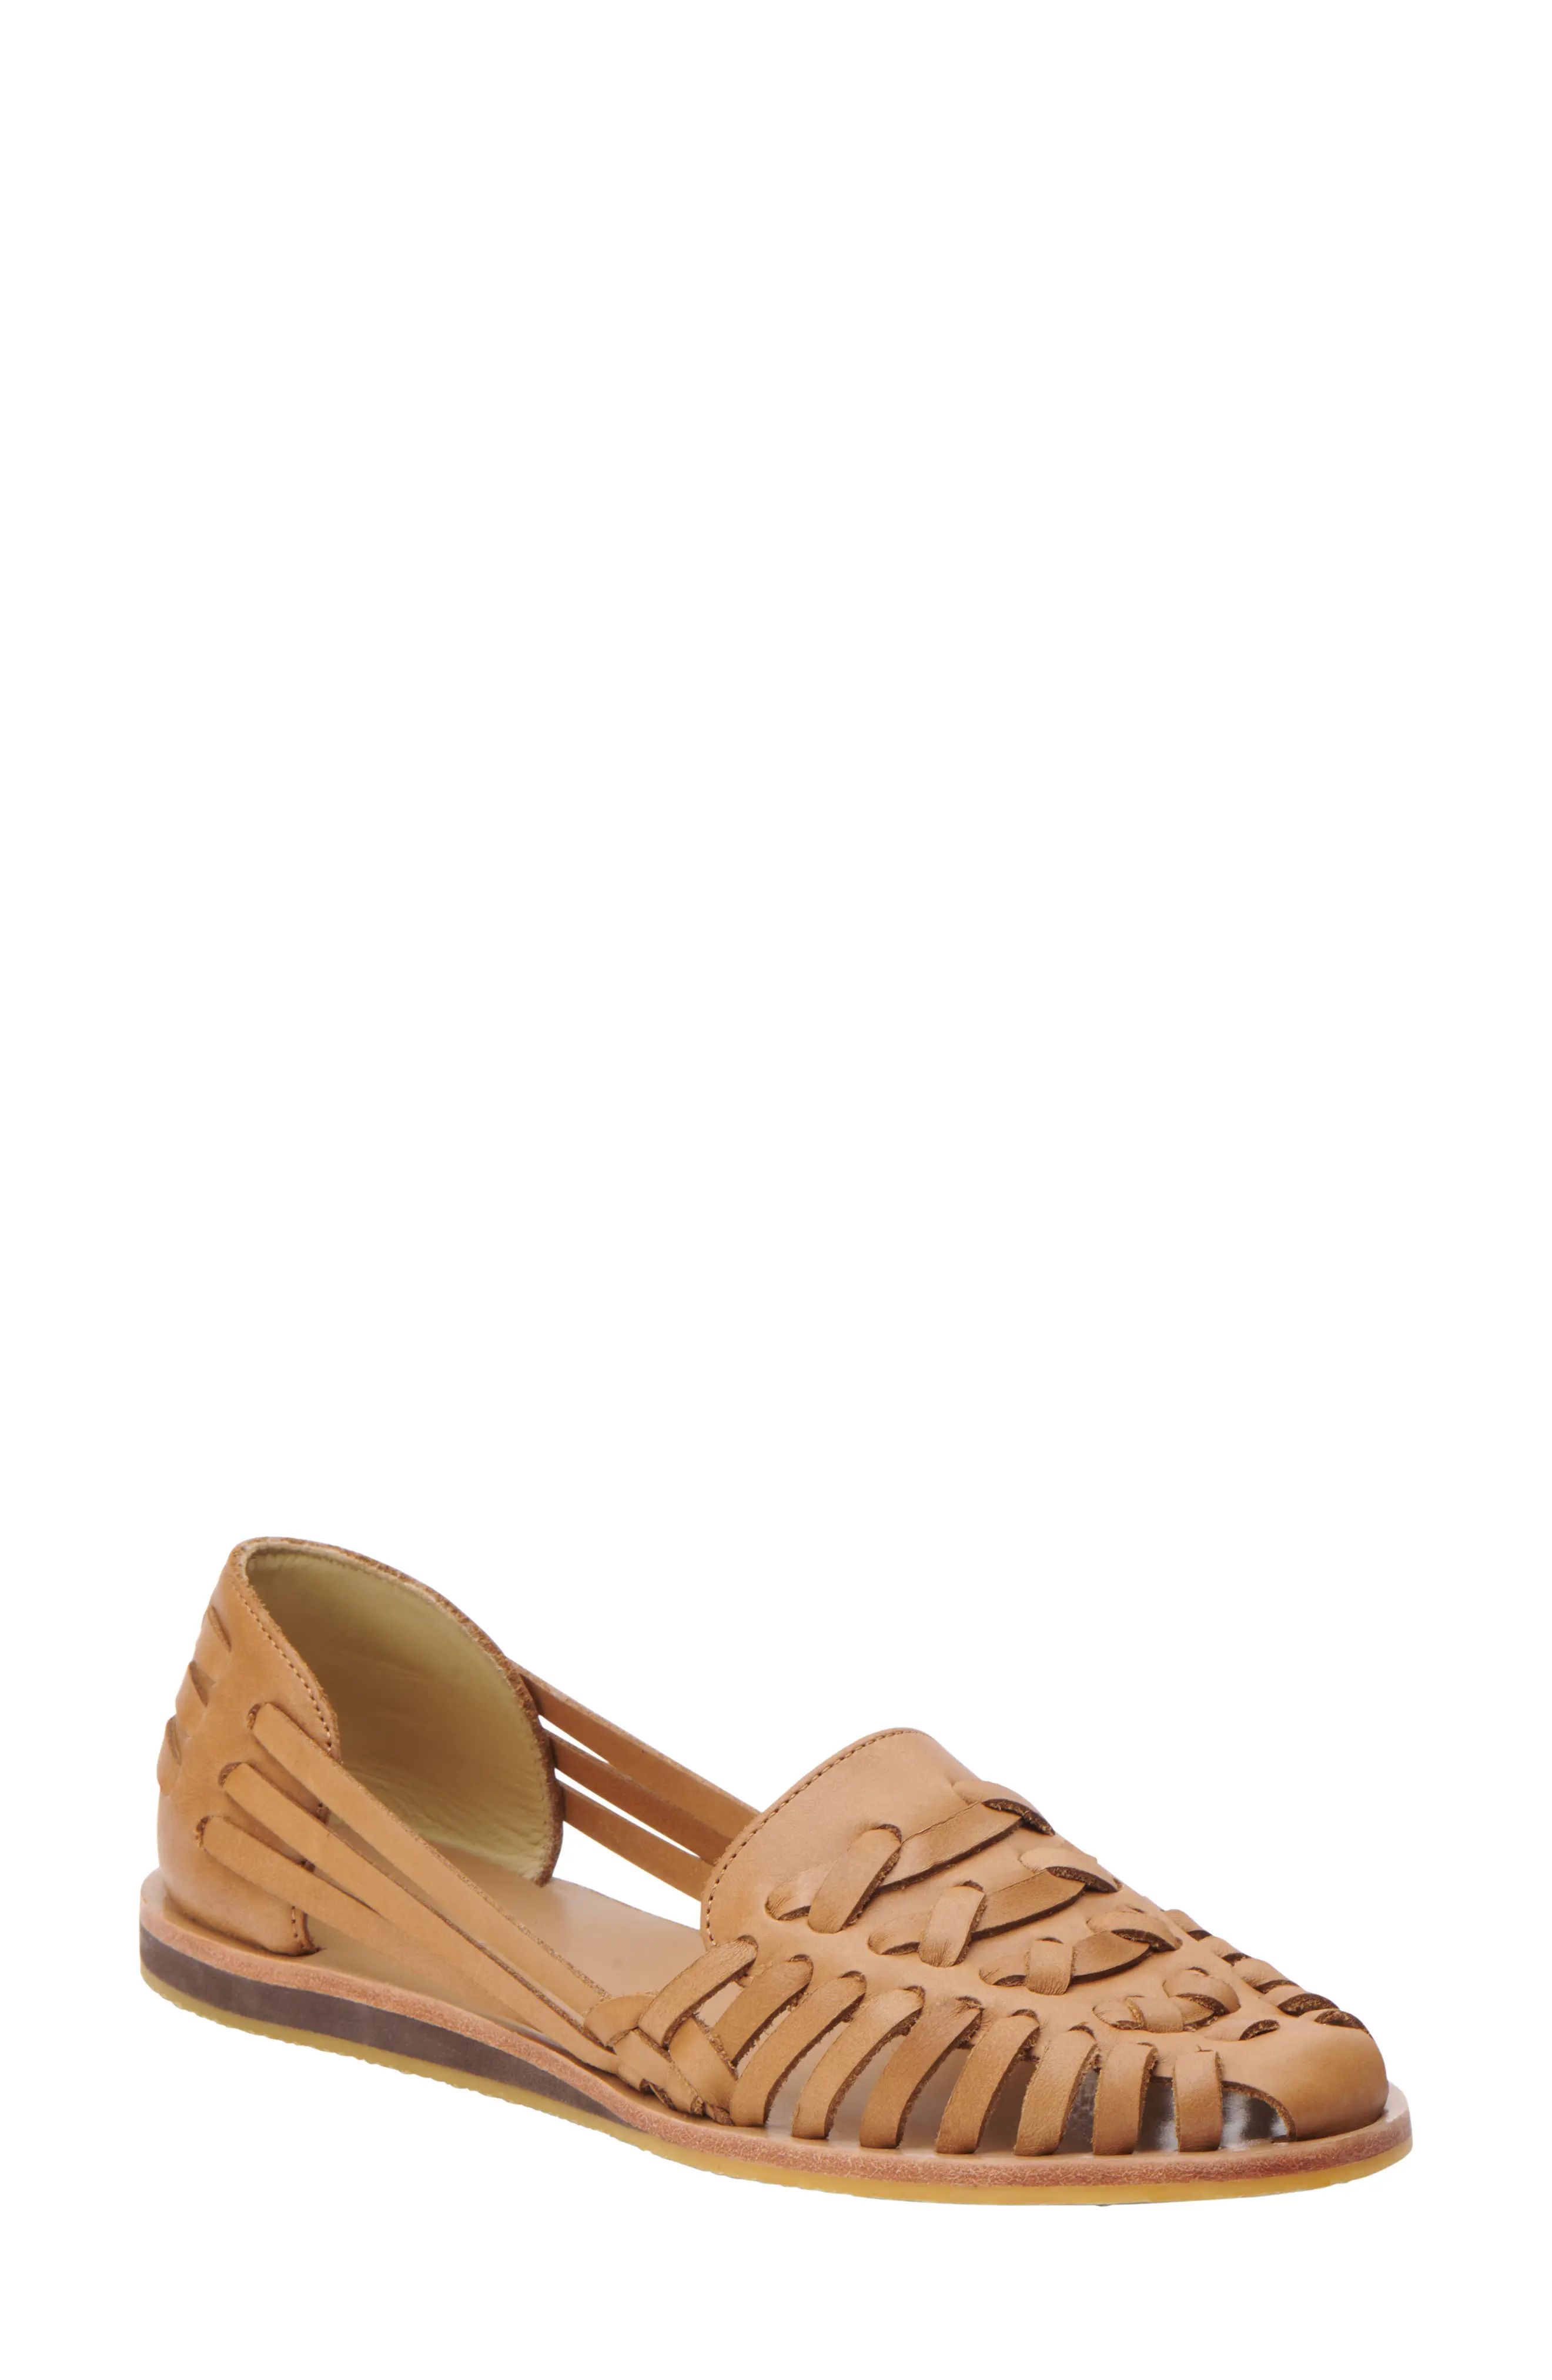 Nisolo Huarache Flat in Almond at Nordstrom, Size 10 | Nordstrom